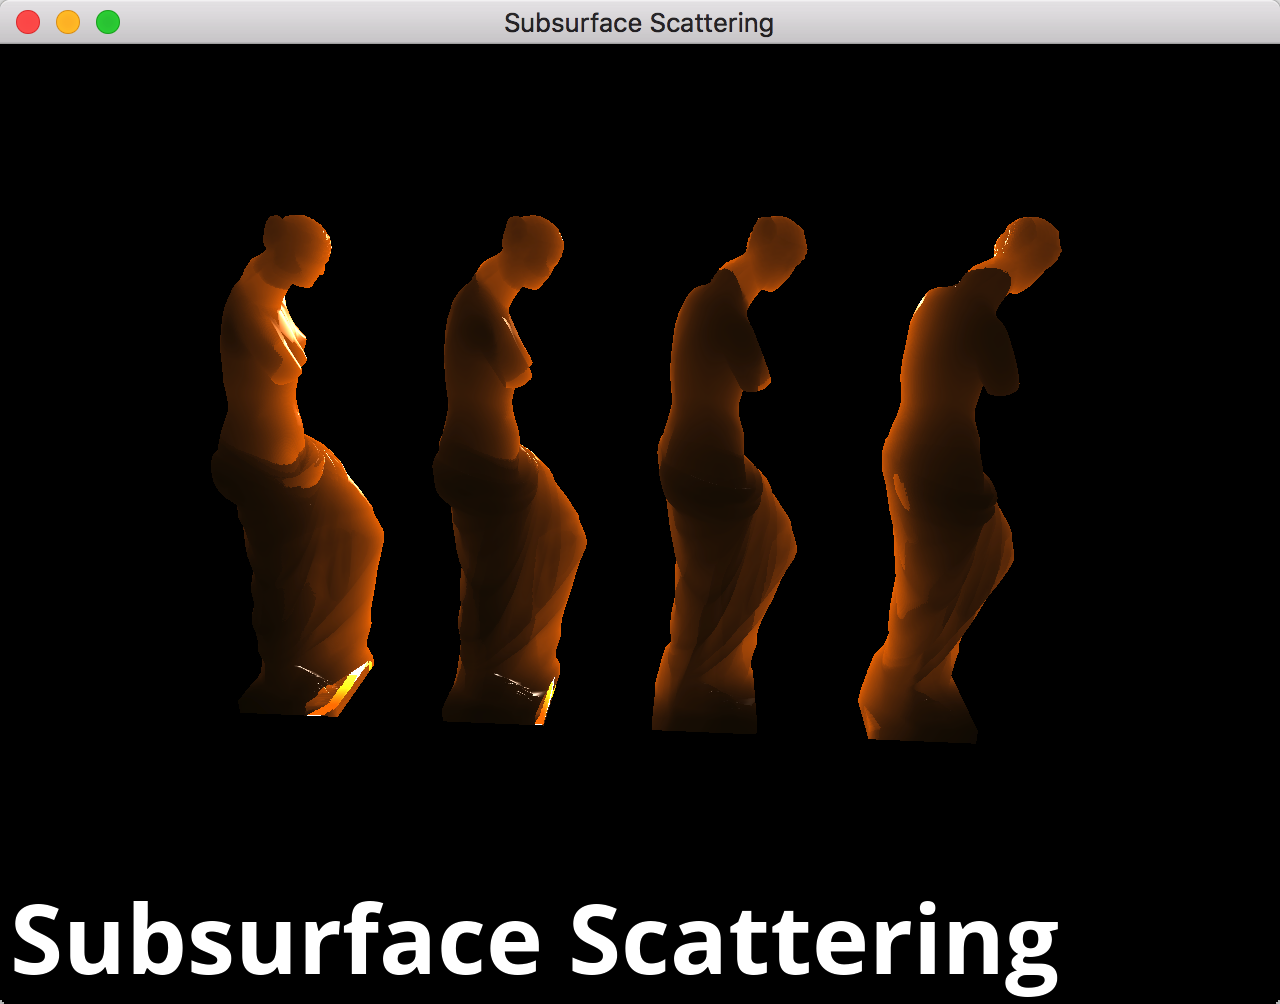 Subsurface Scattering 2